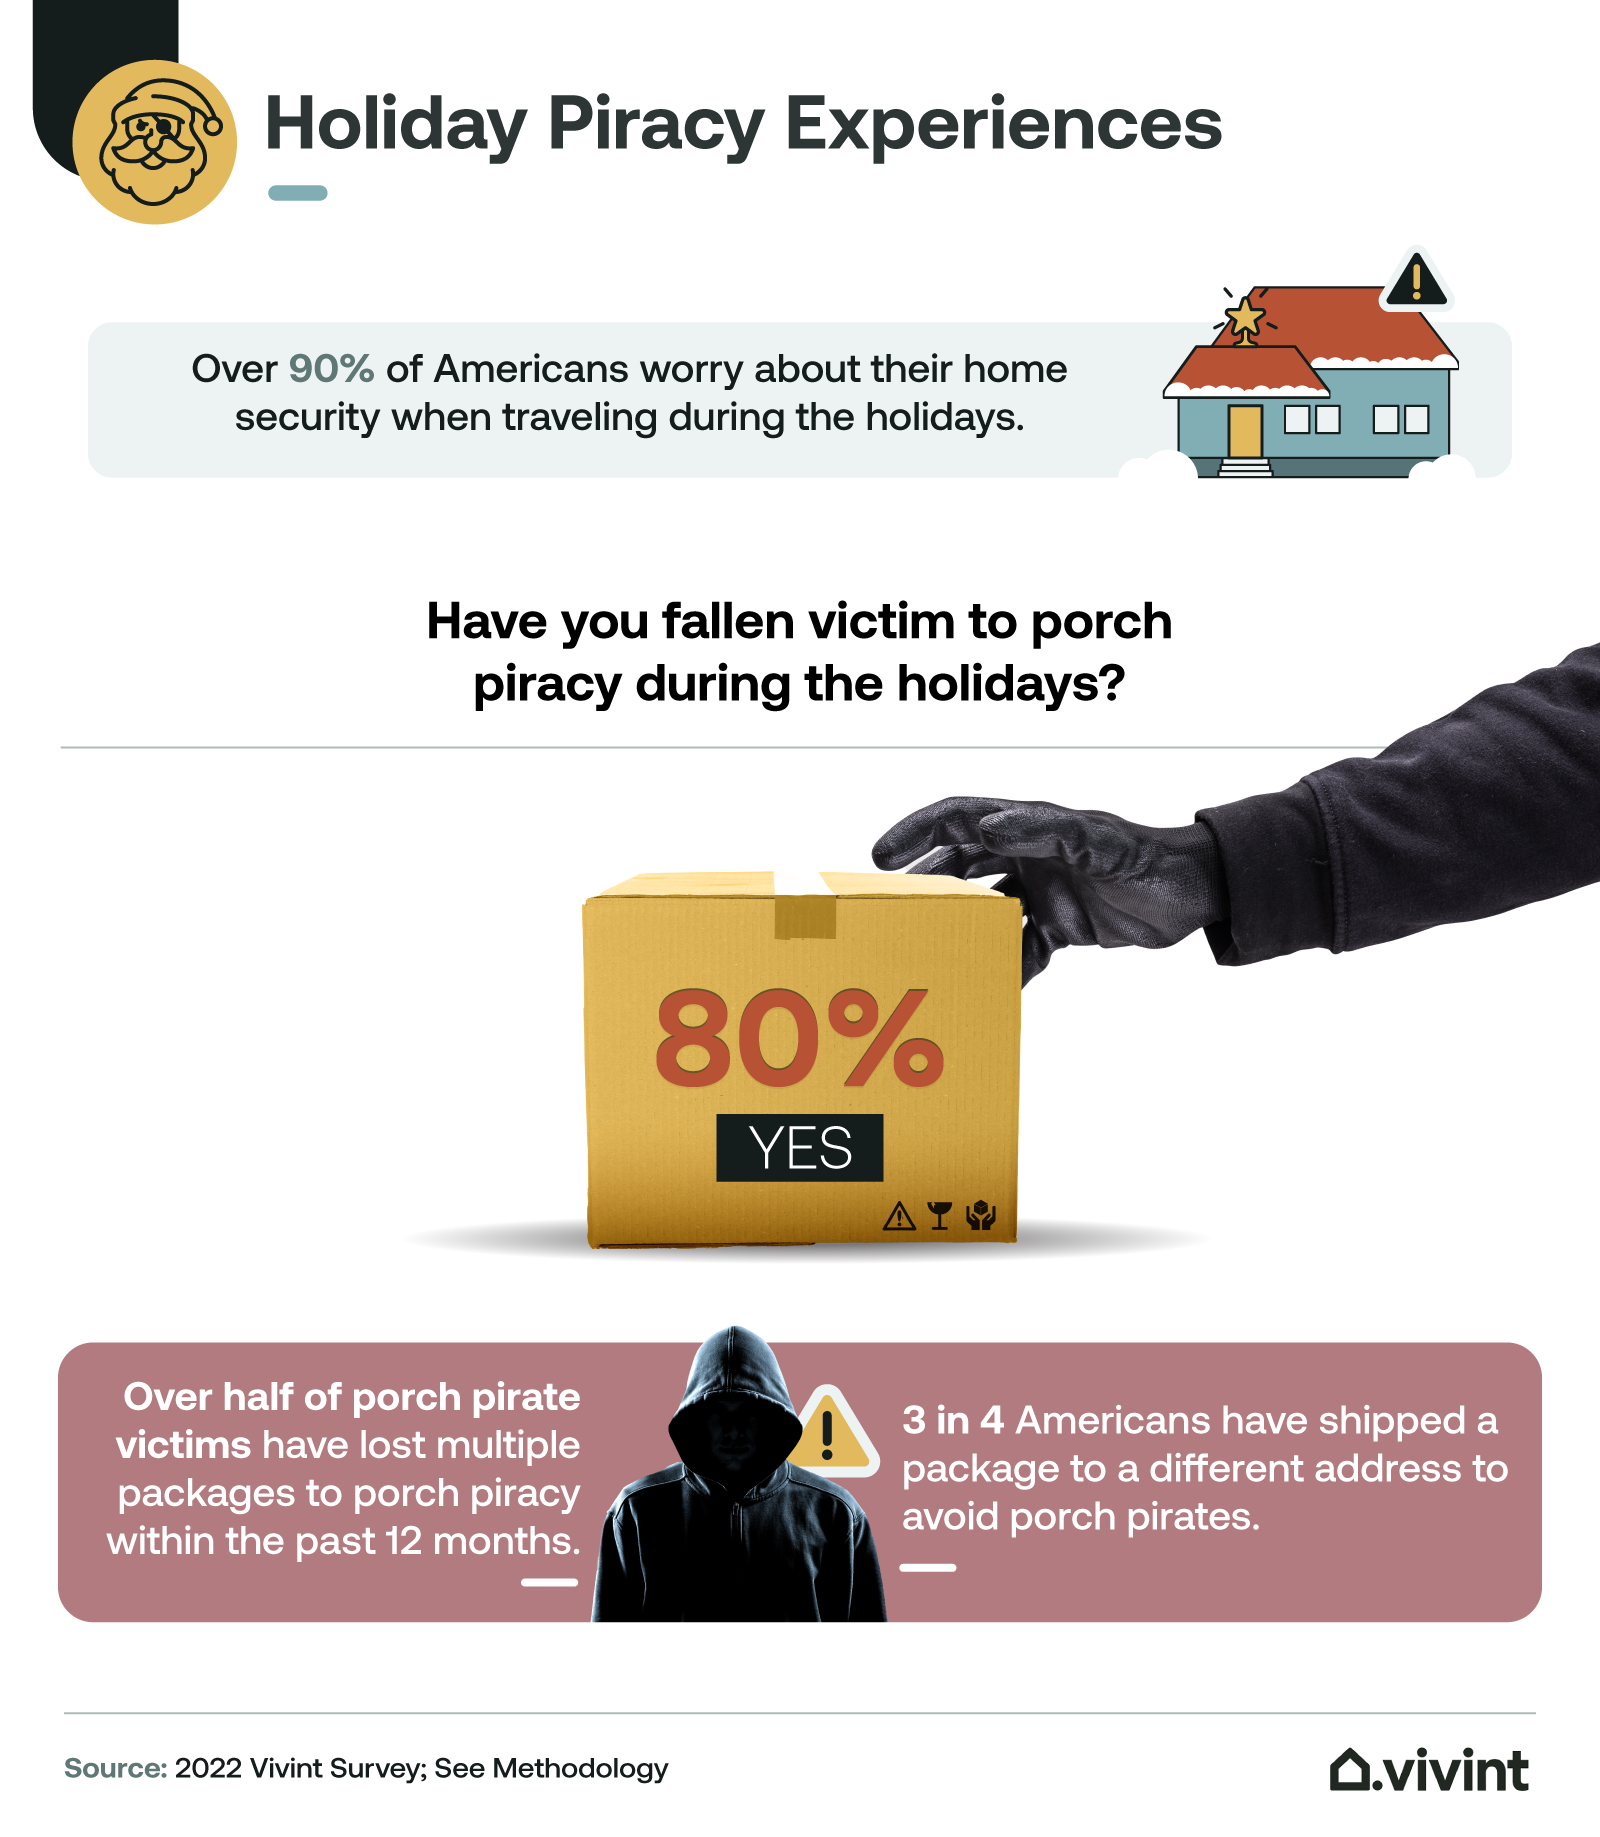 Information about how often people are victims of porch piracy during the holidays.